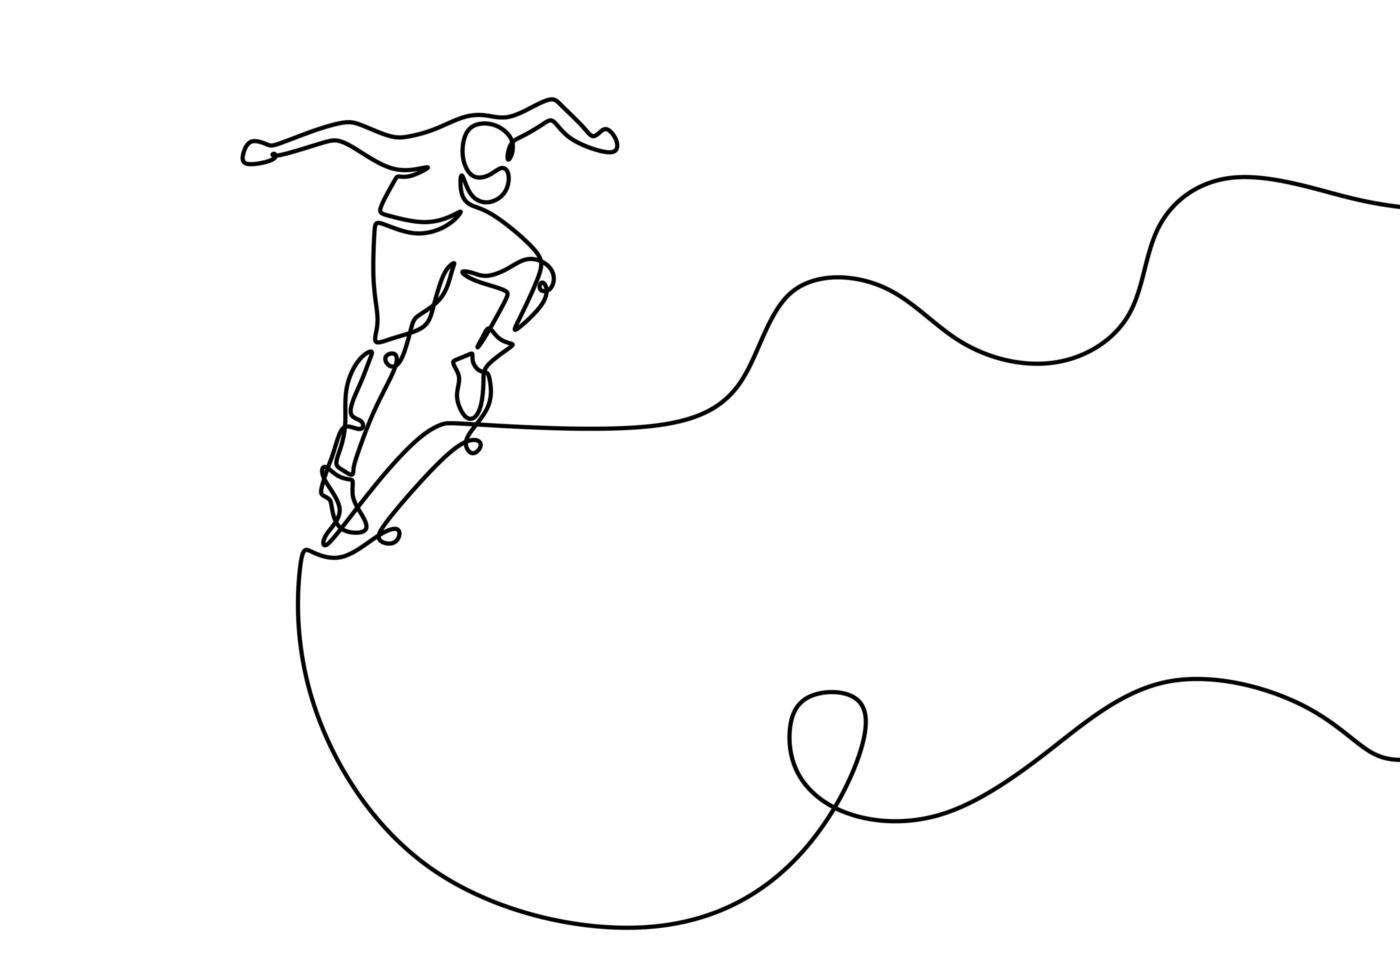 Continuous one line drawing of young man playing skateboarding. Boy playing competition challenging sport isolated on white background. Sport vector illustration theme. Minimalist style